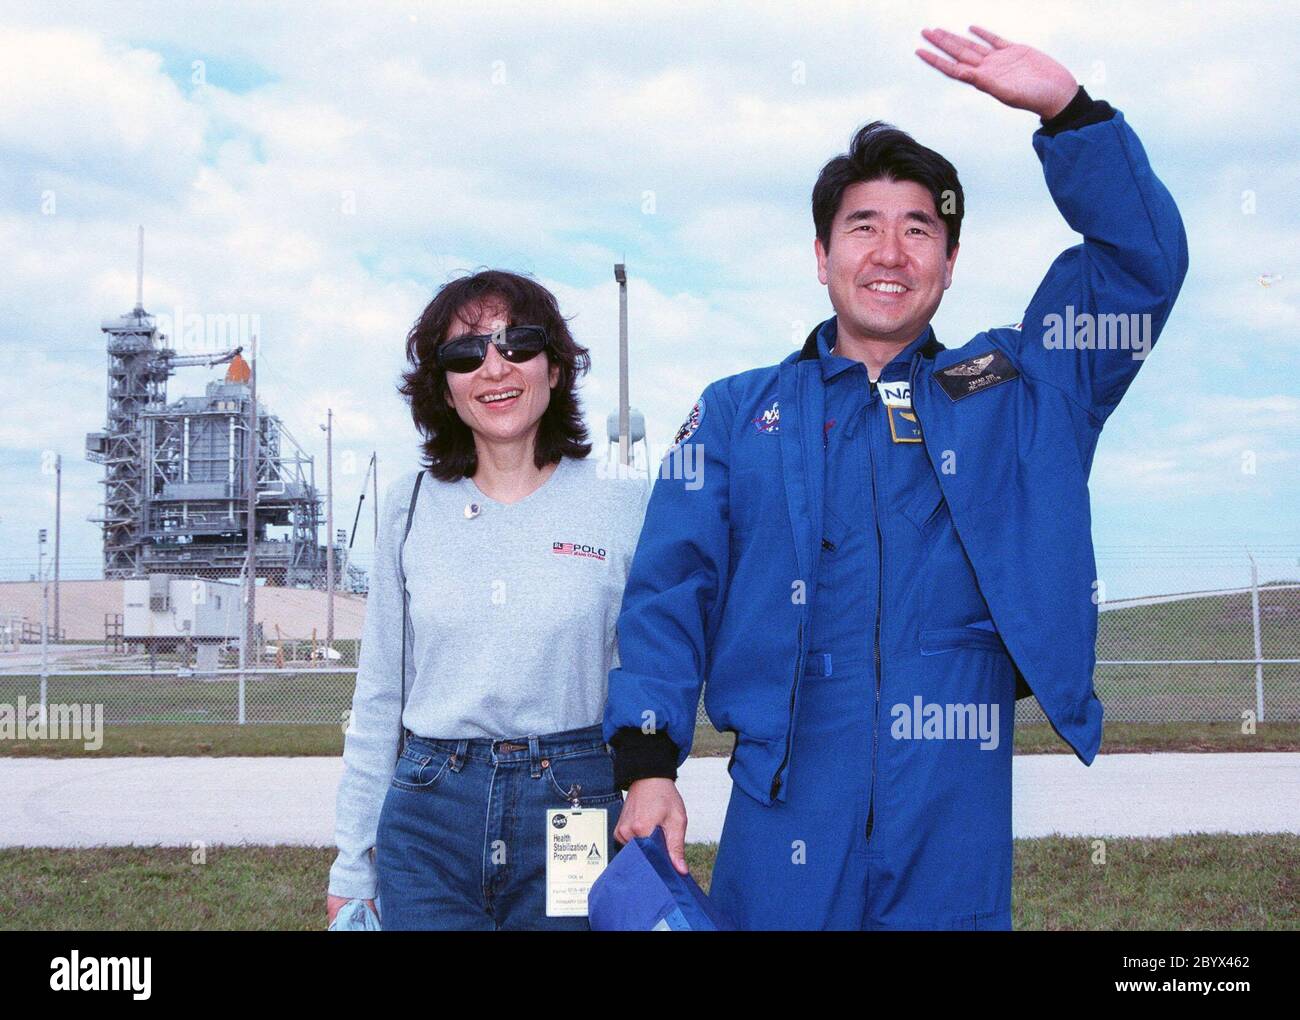 STS-87 Mission Specialist Takao Doi, Ph.D., of the National Space Development Agency of Japan poses with his wife, Hitomi Doi, in front of Kennedy Space Center's Launch Pad 39B during final prelaunch activities leading up to the scheduled Nov. 19 liftoff. The other STS-87 crew members are Commander Kevin Kregel; Pilot Steven Lindsey; Mission Specialists Kalpana Chawla, Ph.D., and Winston Scott; and Payload Specialist Leonid Kadenyuk of the National Space Agency of Ukraine. STS-87 will be the fourth flight of the United States Microgravity Payload and the Spartan-201 deployable satellite Stock Photo